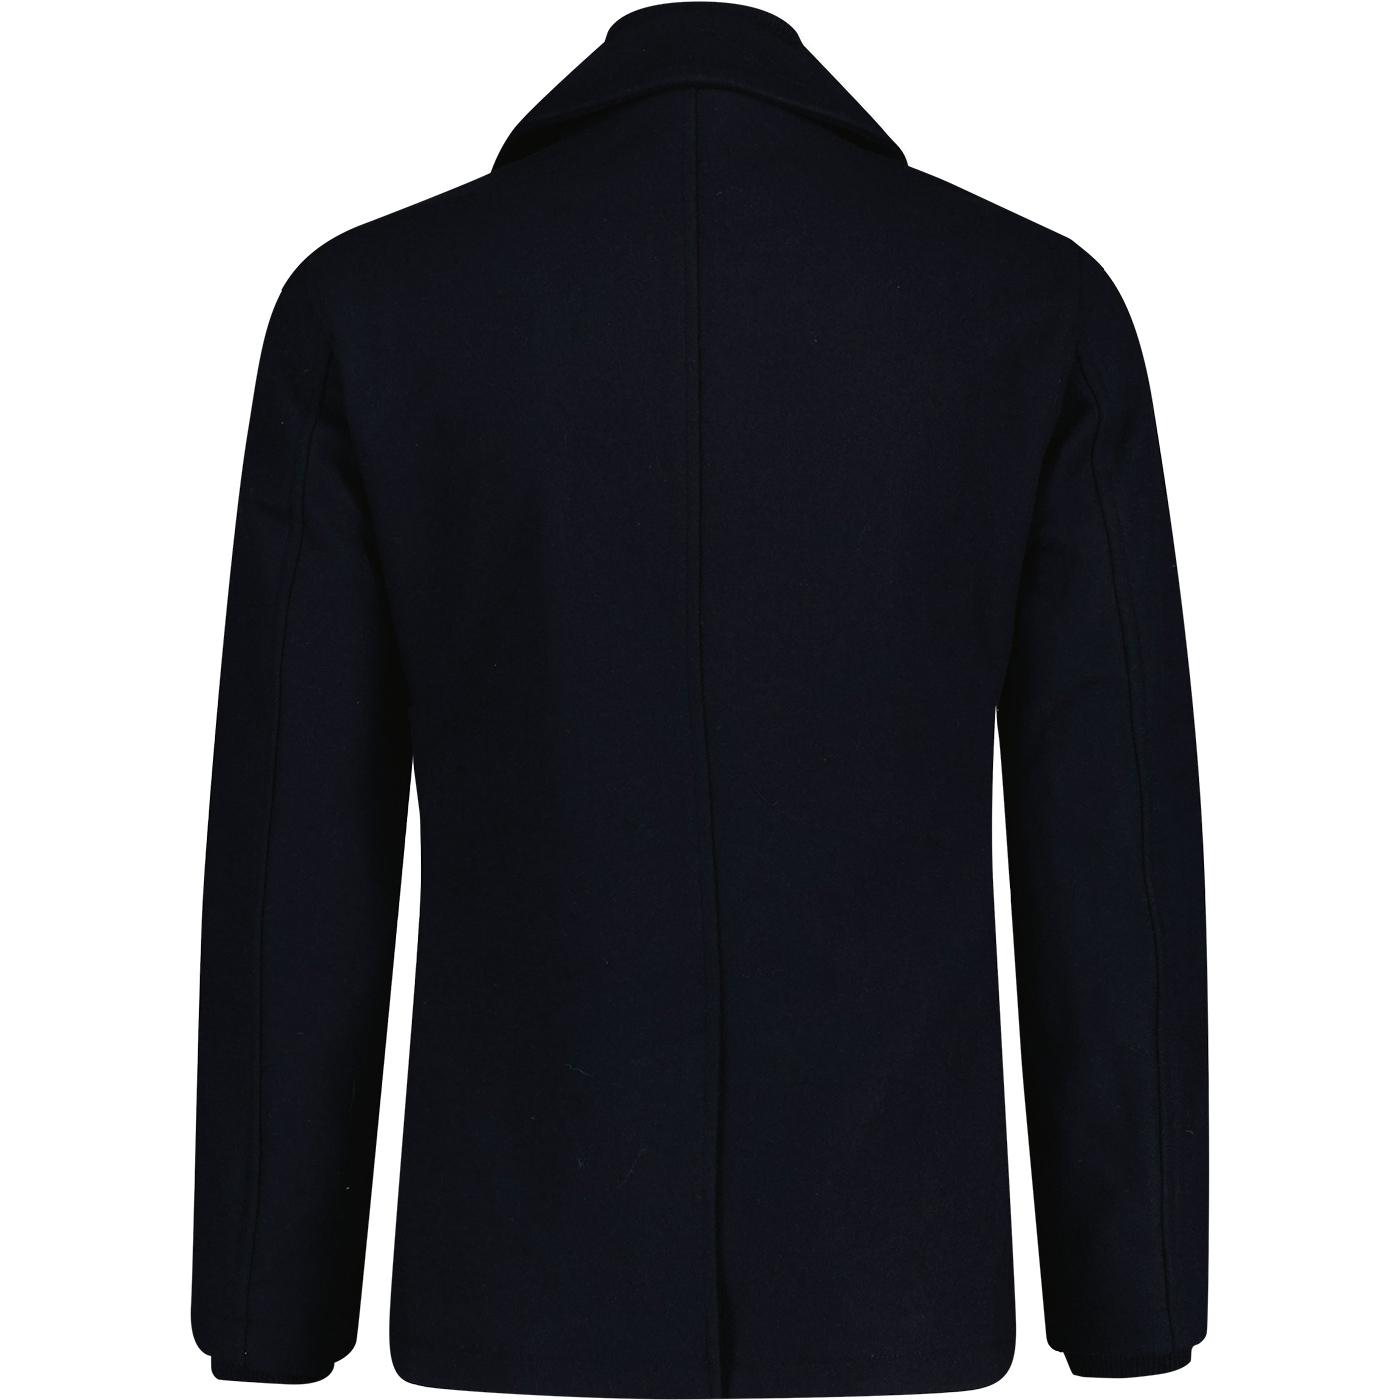 French Connection Double Breasted Layered Pea Coat in Navy